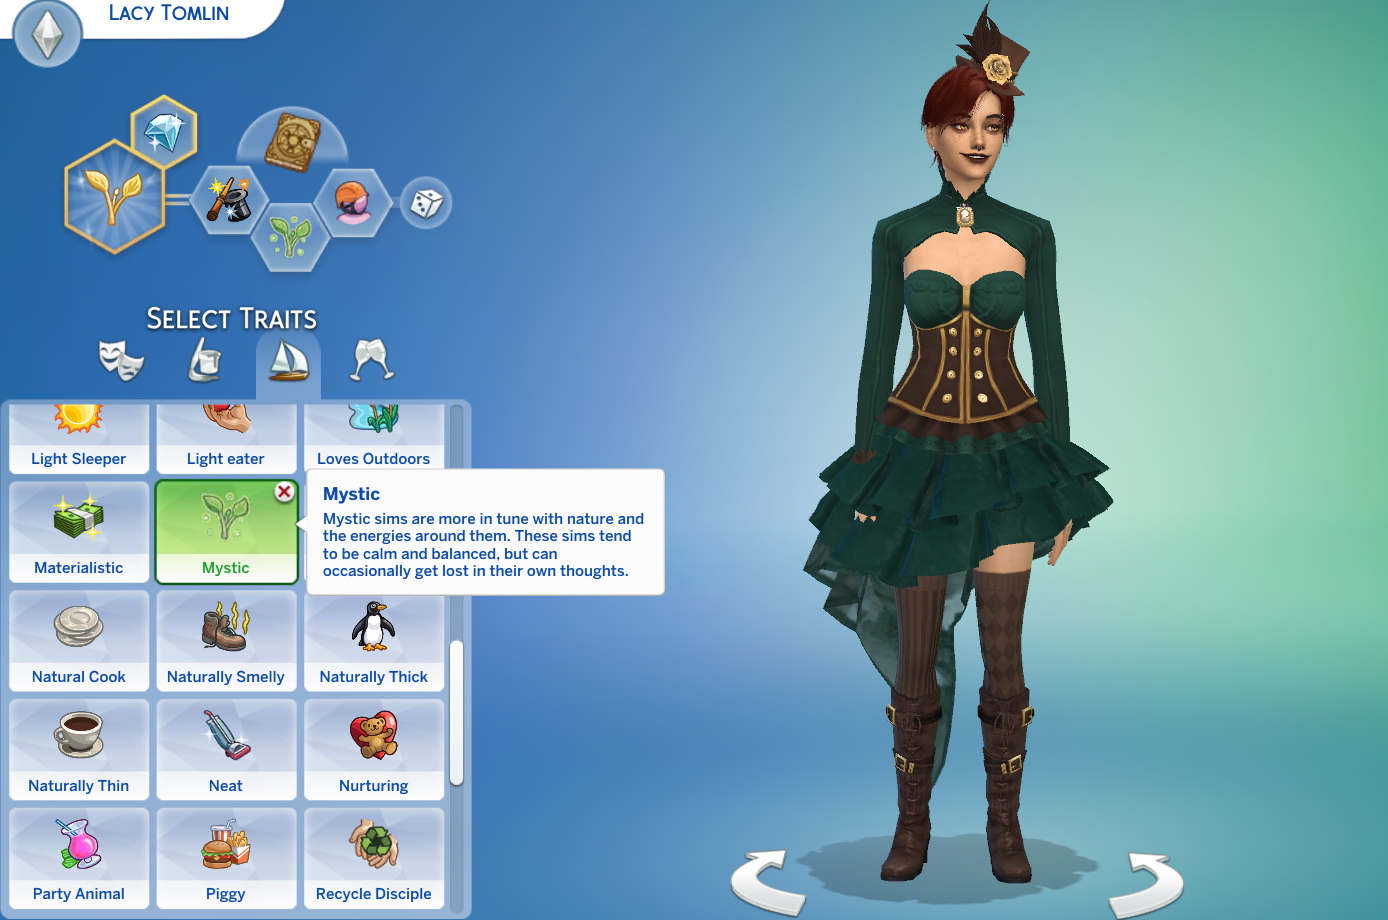 Mystic Trait by MissBee from Mod The Sims • Sims 4 Downloads